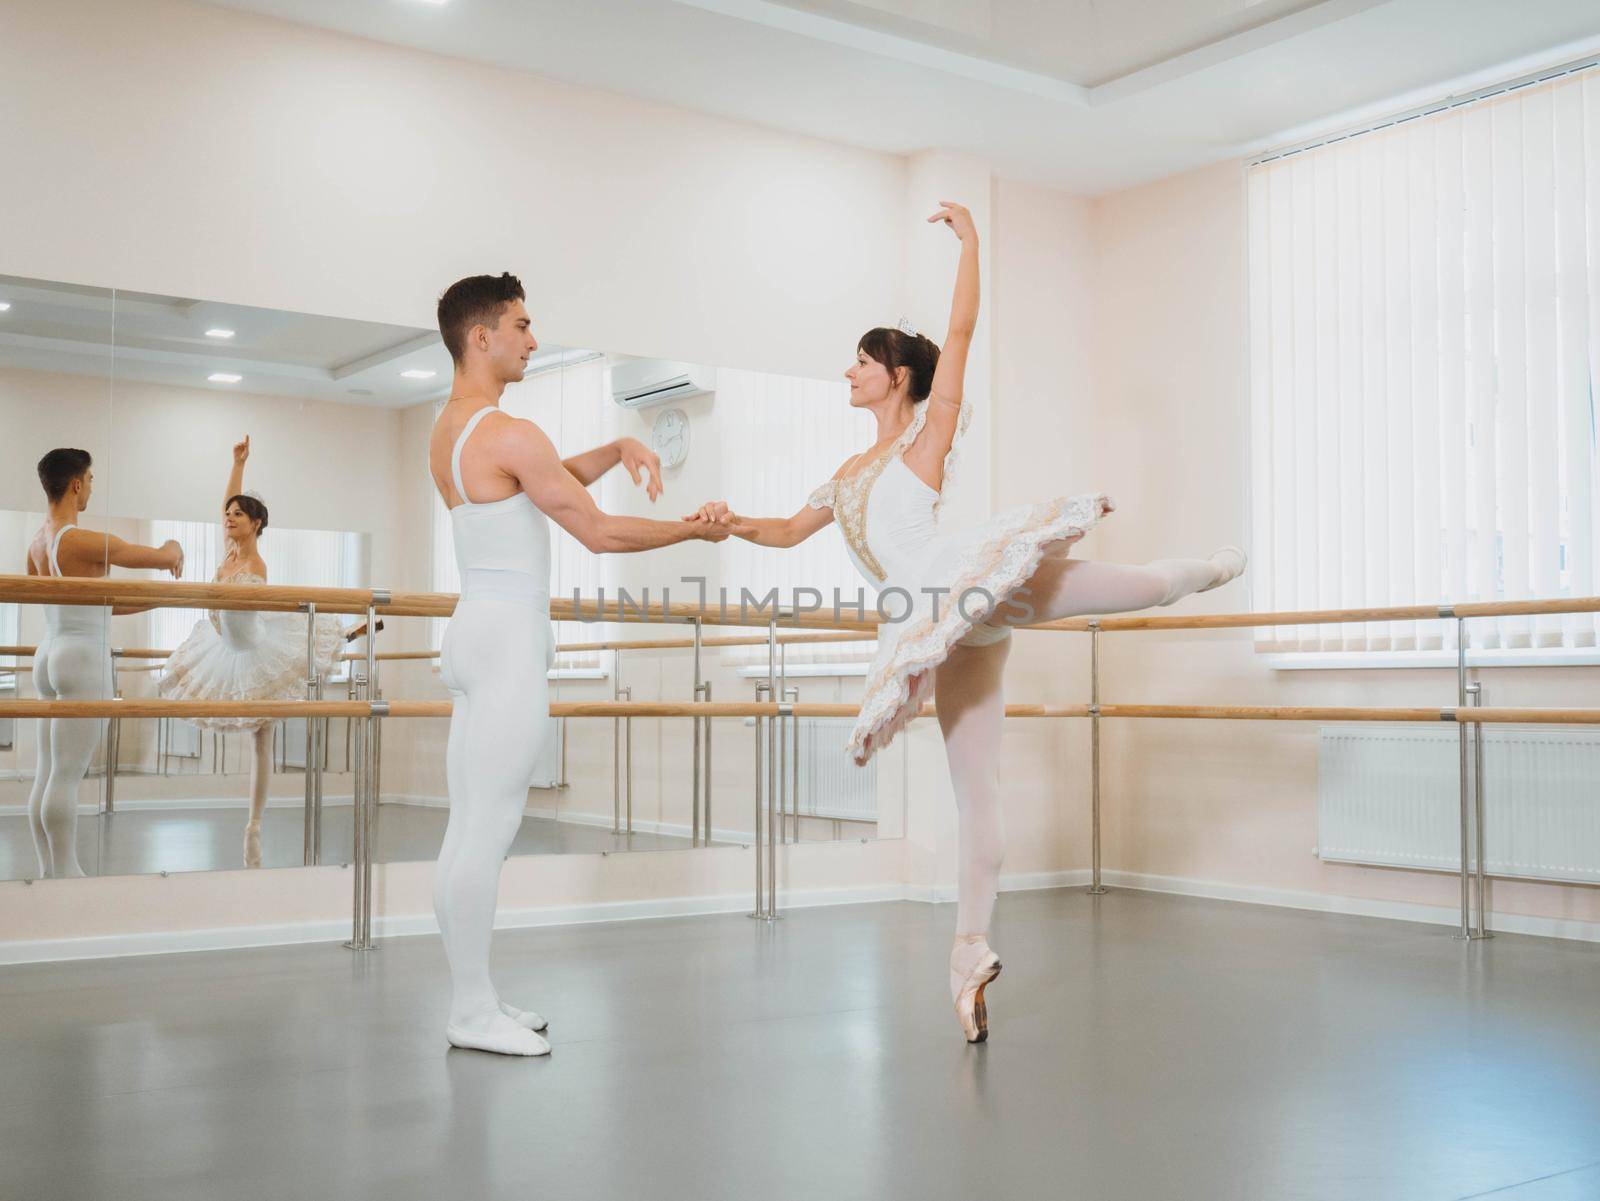 Professional, emotional ballet dancers practicing in the gym or hall with minimalism interior. Couple dancing a sensual dance before performance.